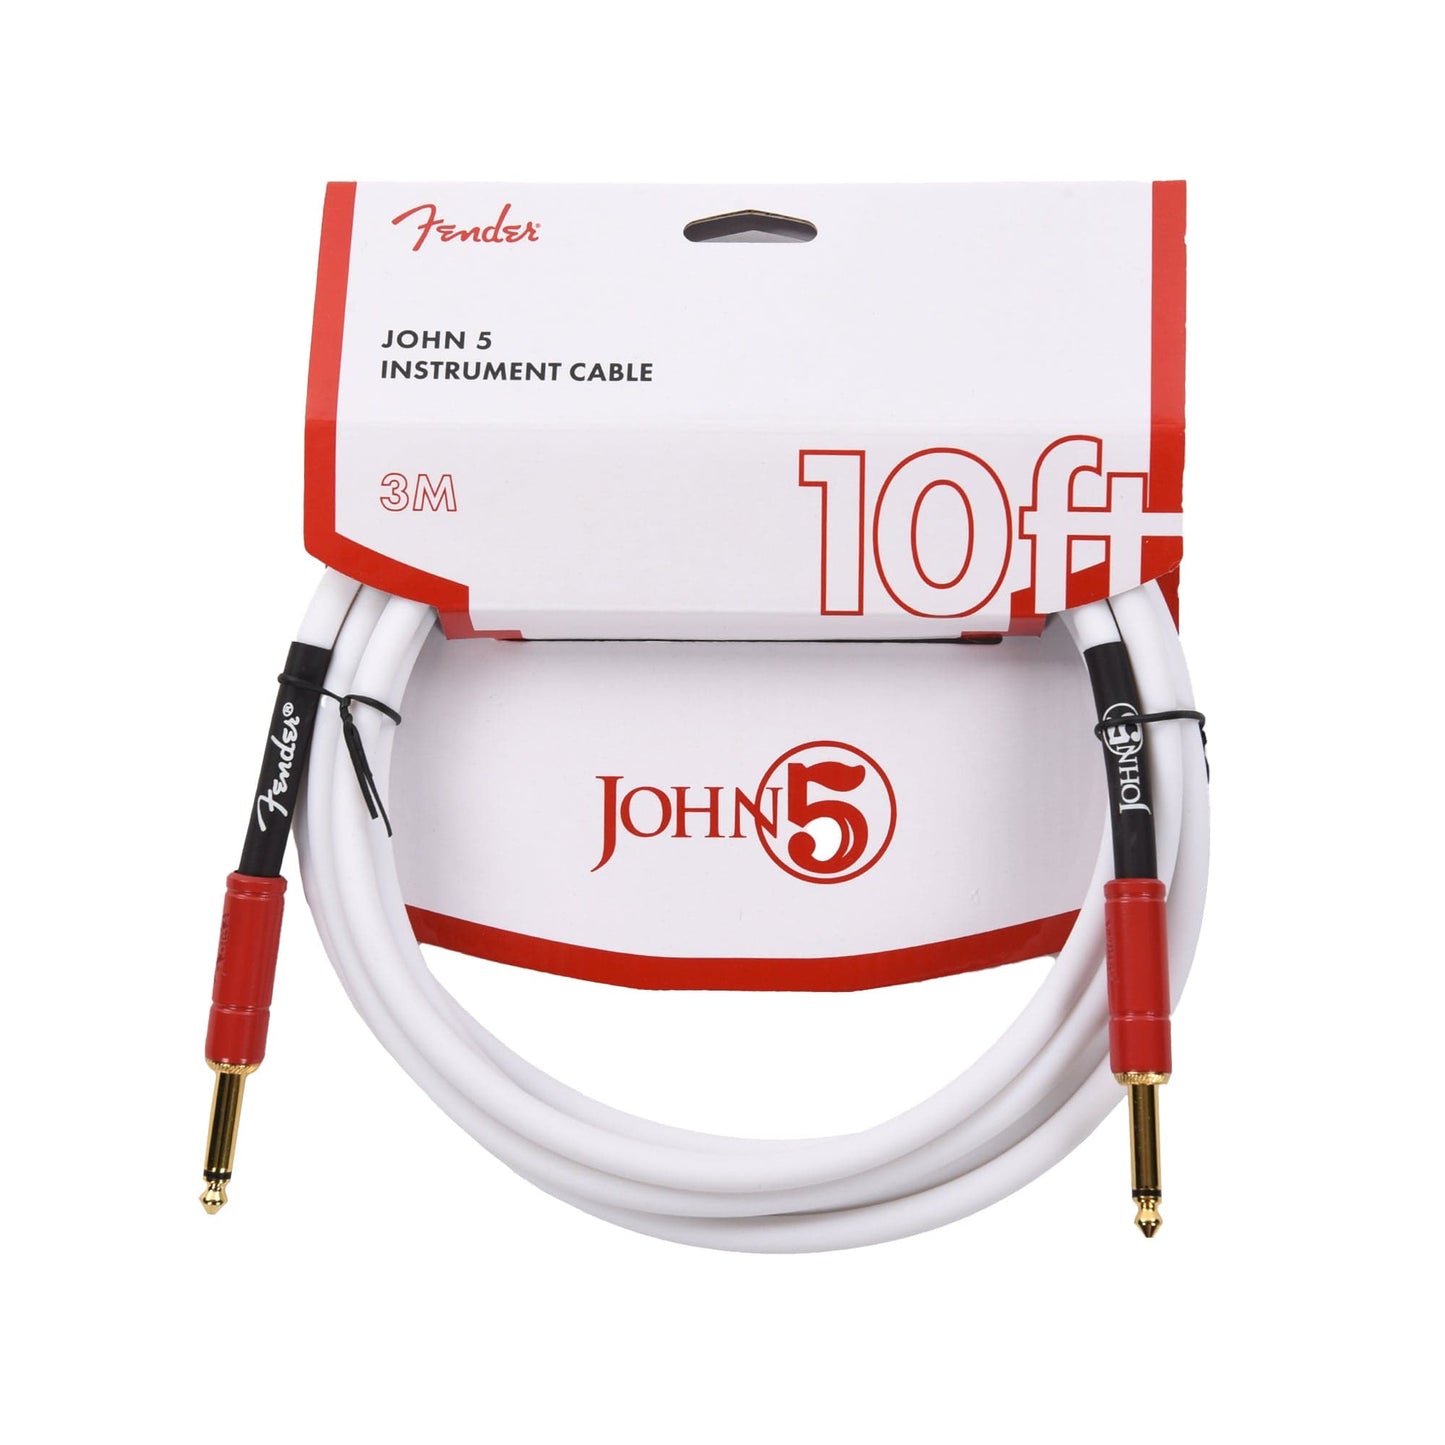 Fender John 5 10' Instrument Cable White/Red Accessories / Cables